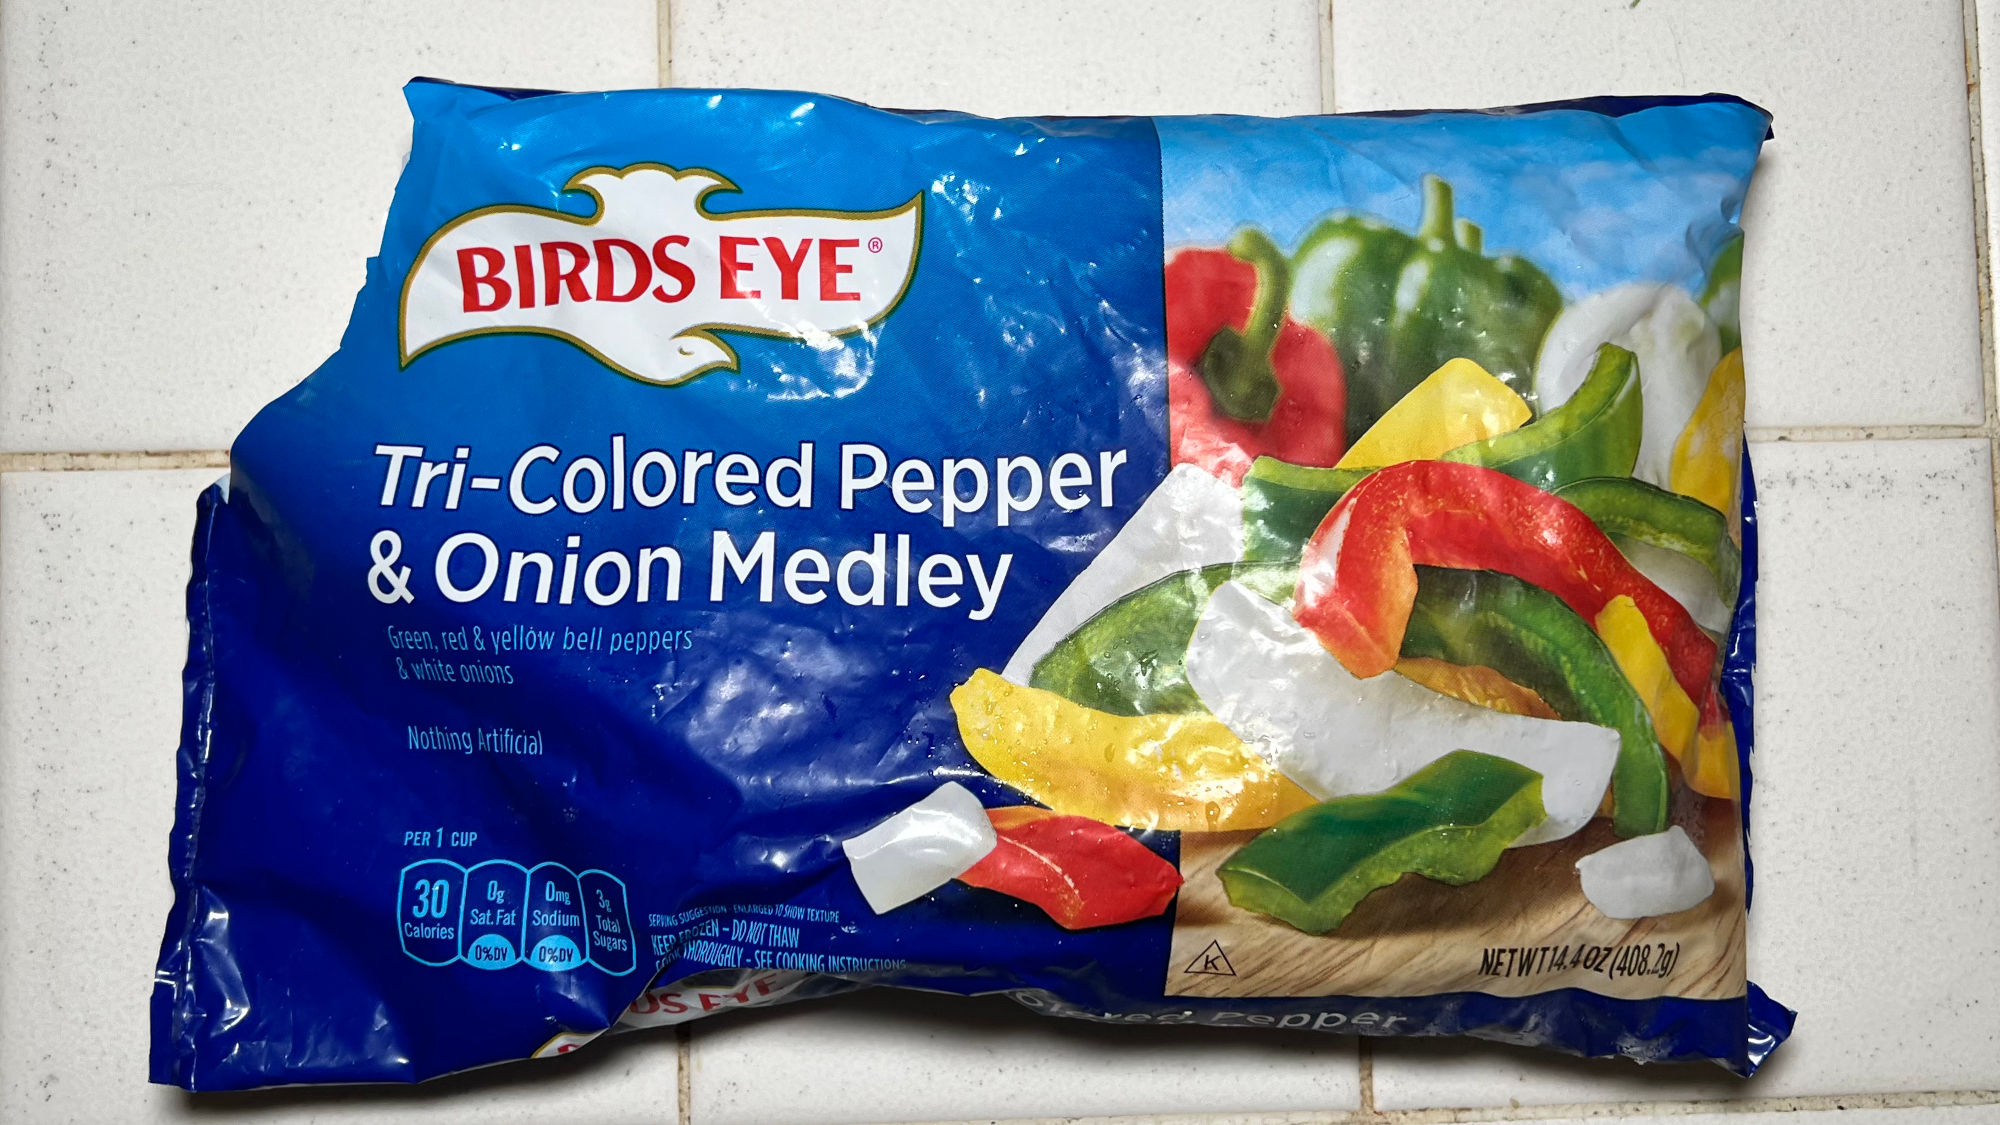 https://www.eatlife.net/want/images/peppers-and-onions-birds-eye.jpg